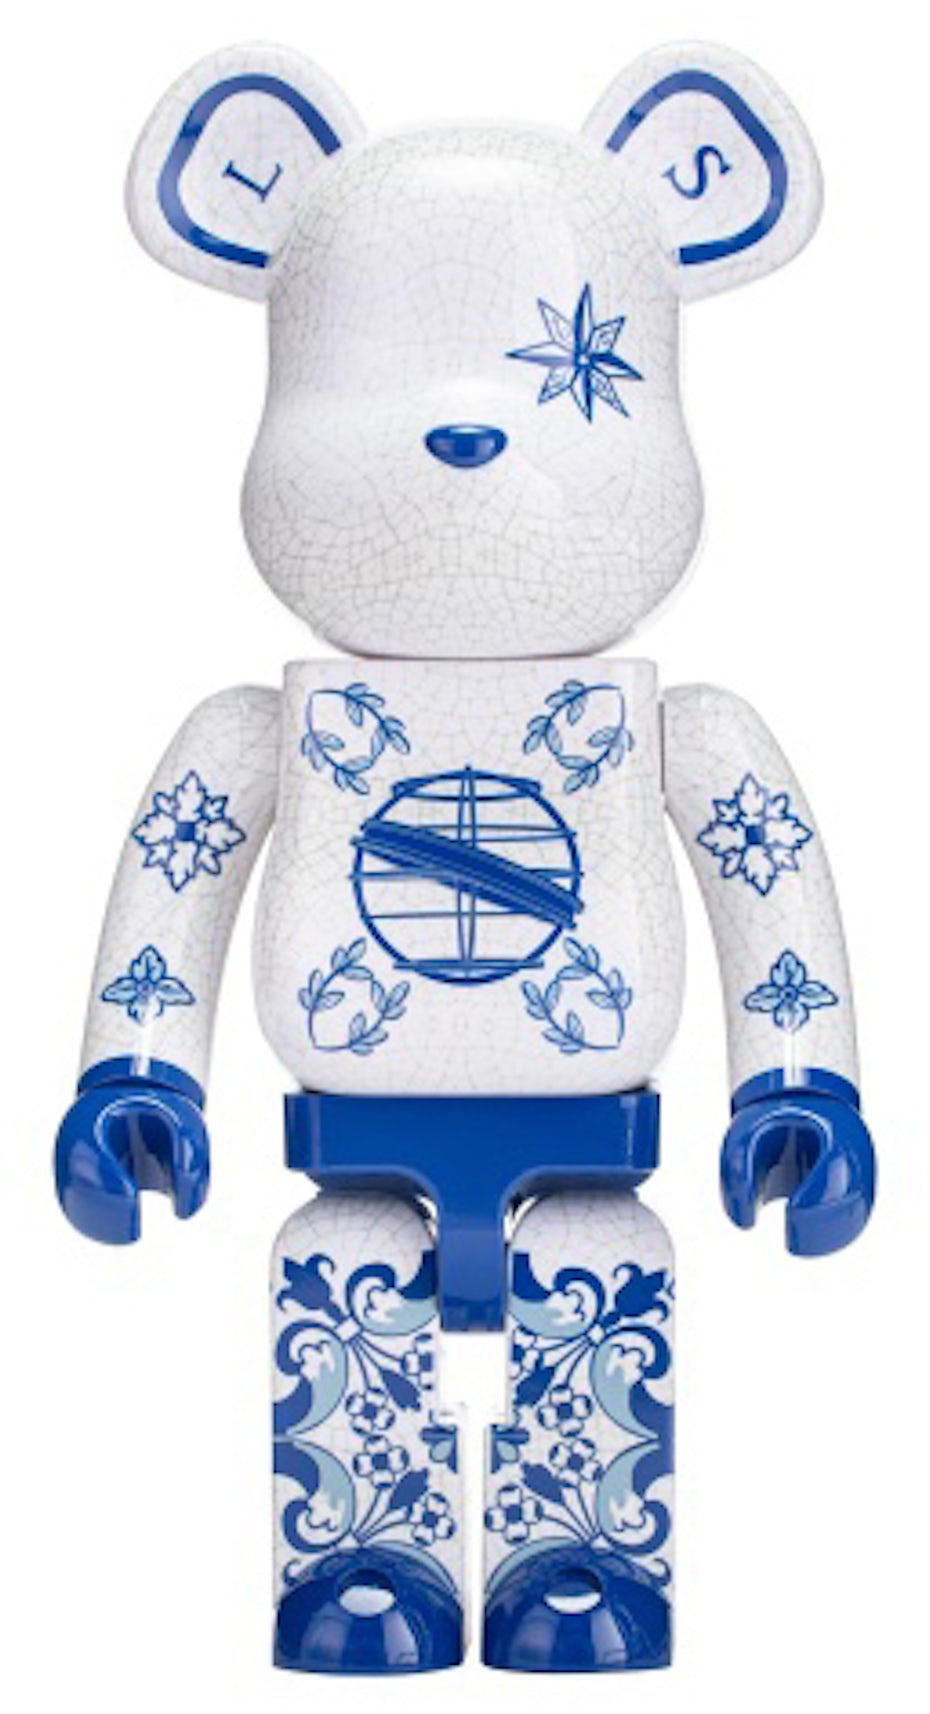 These 10 Bearbrick Figures Rule the Market in 2023